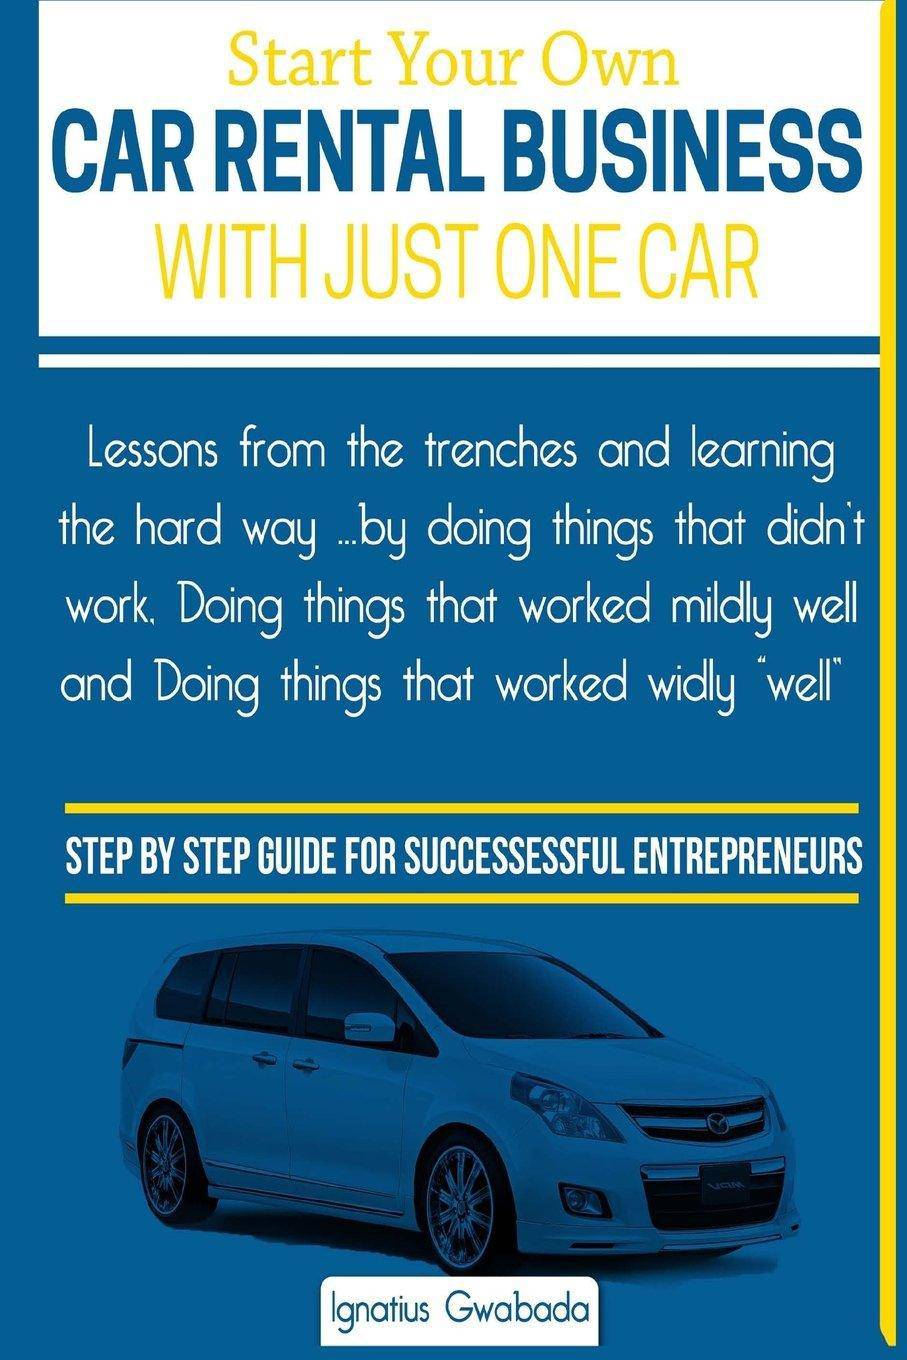 Start Your Own Car Rental Business With Just One Car - SureShot Books Publishing LLC